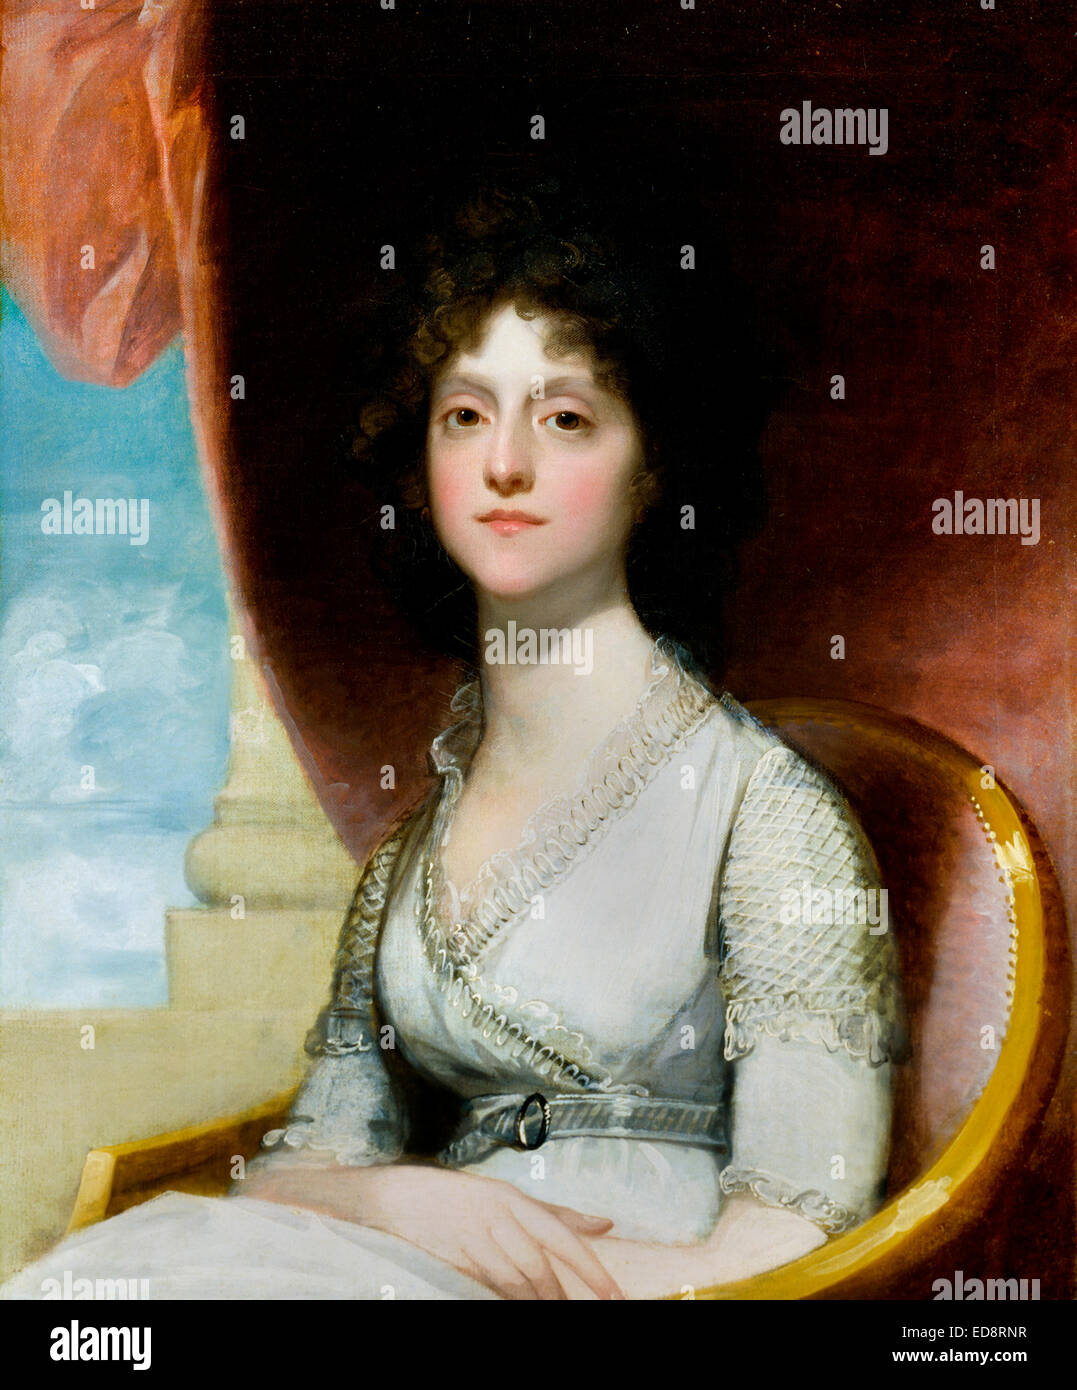 Gilbert Stuart, Marianne Ashley Walker 1799 Oil on canvas. Indianapolis Museum of Art, Indiana, USA. Stock Photo